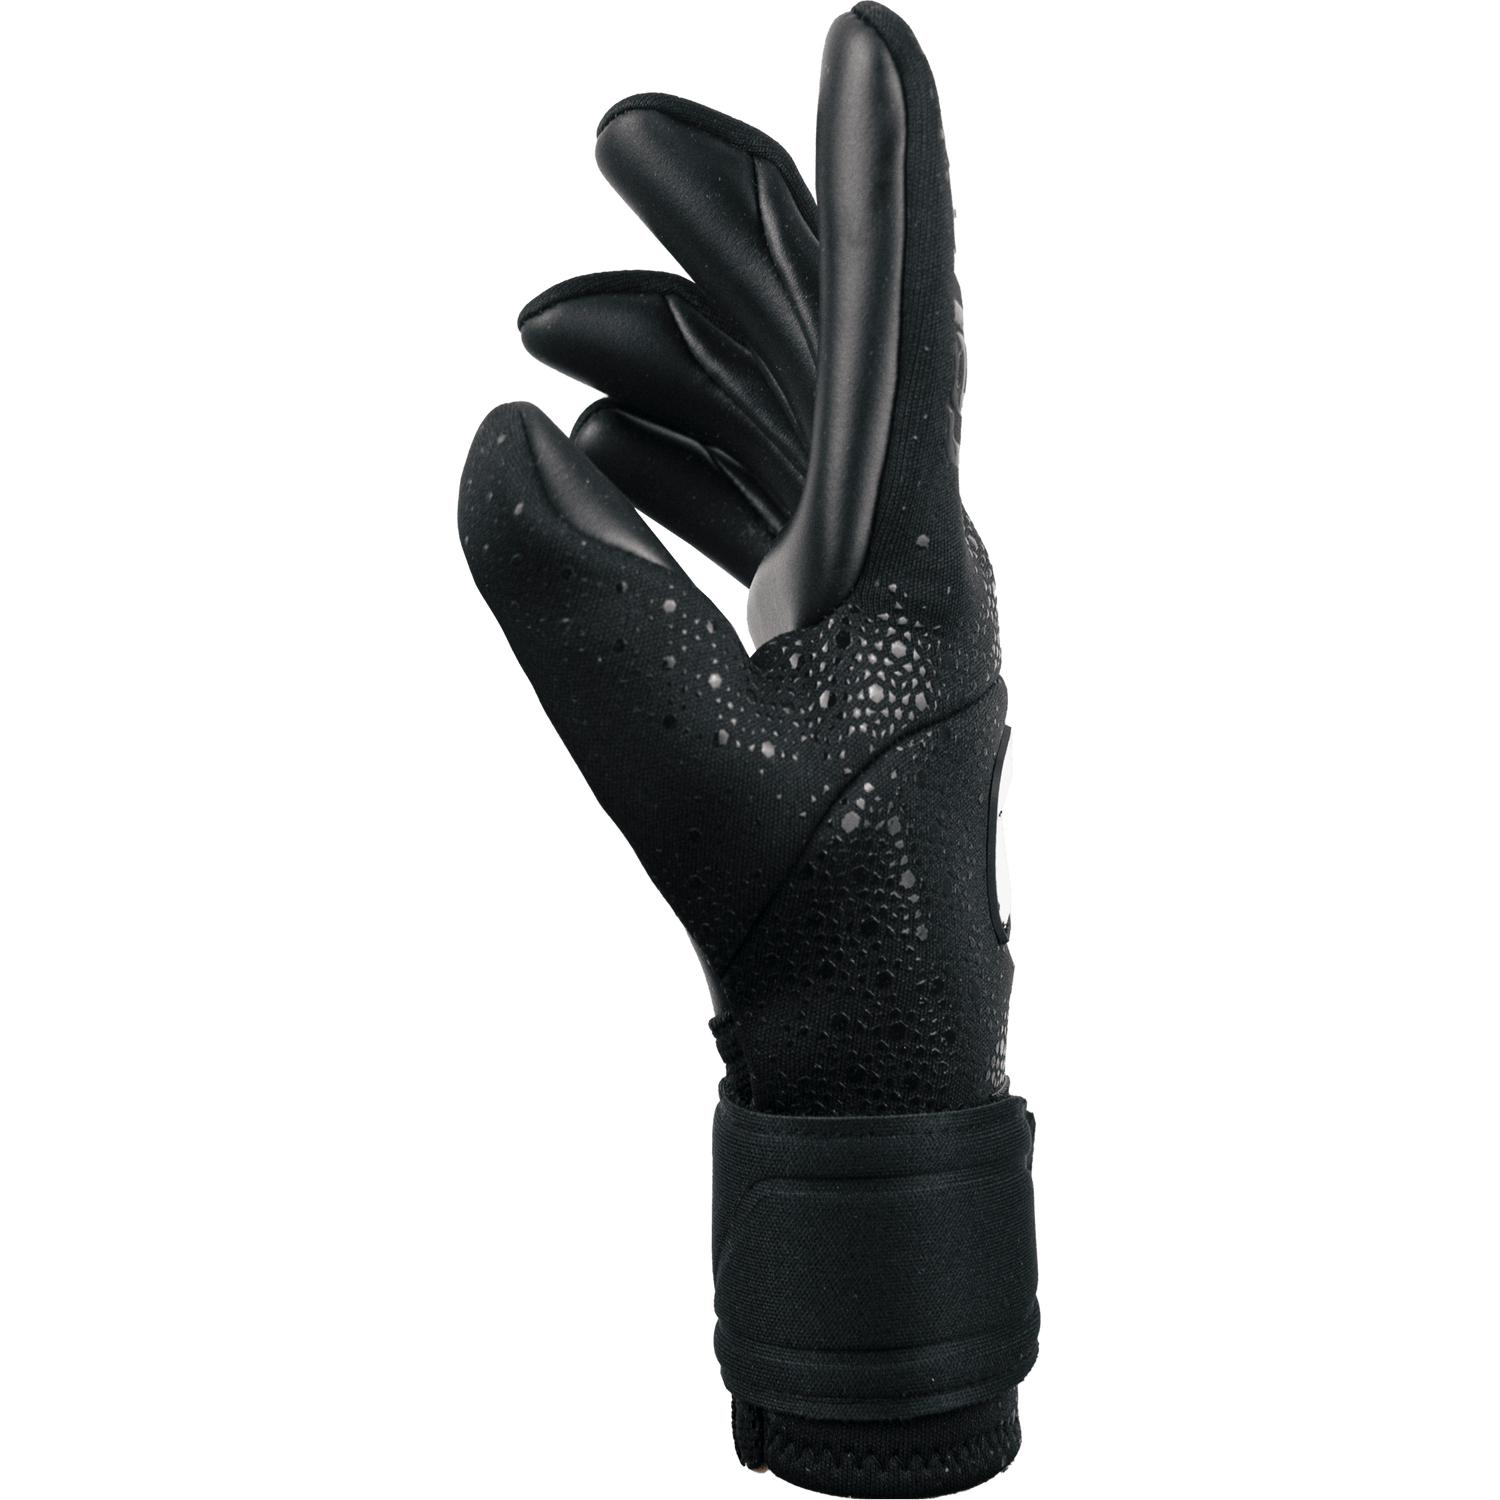 Reusch Pure Contact Infinity Goalkeeper Gloves - Black-White (Single - Side)